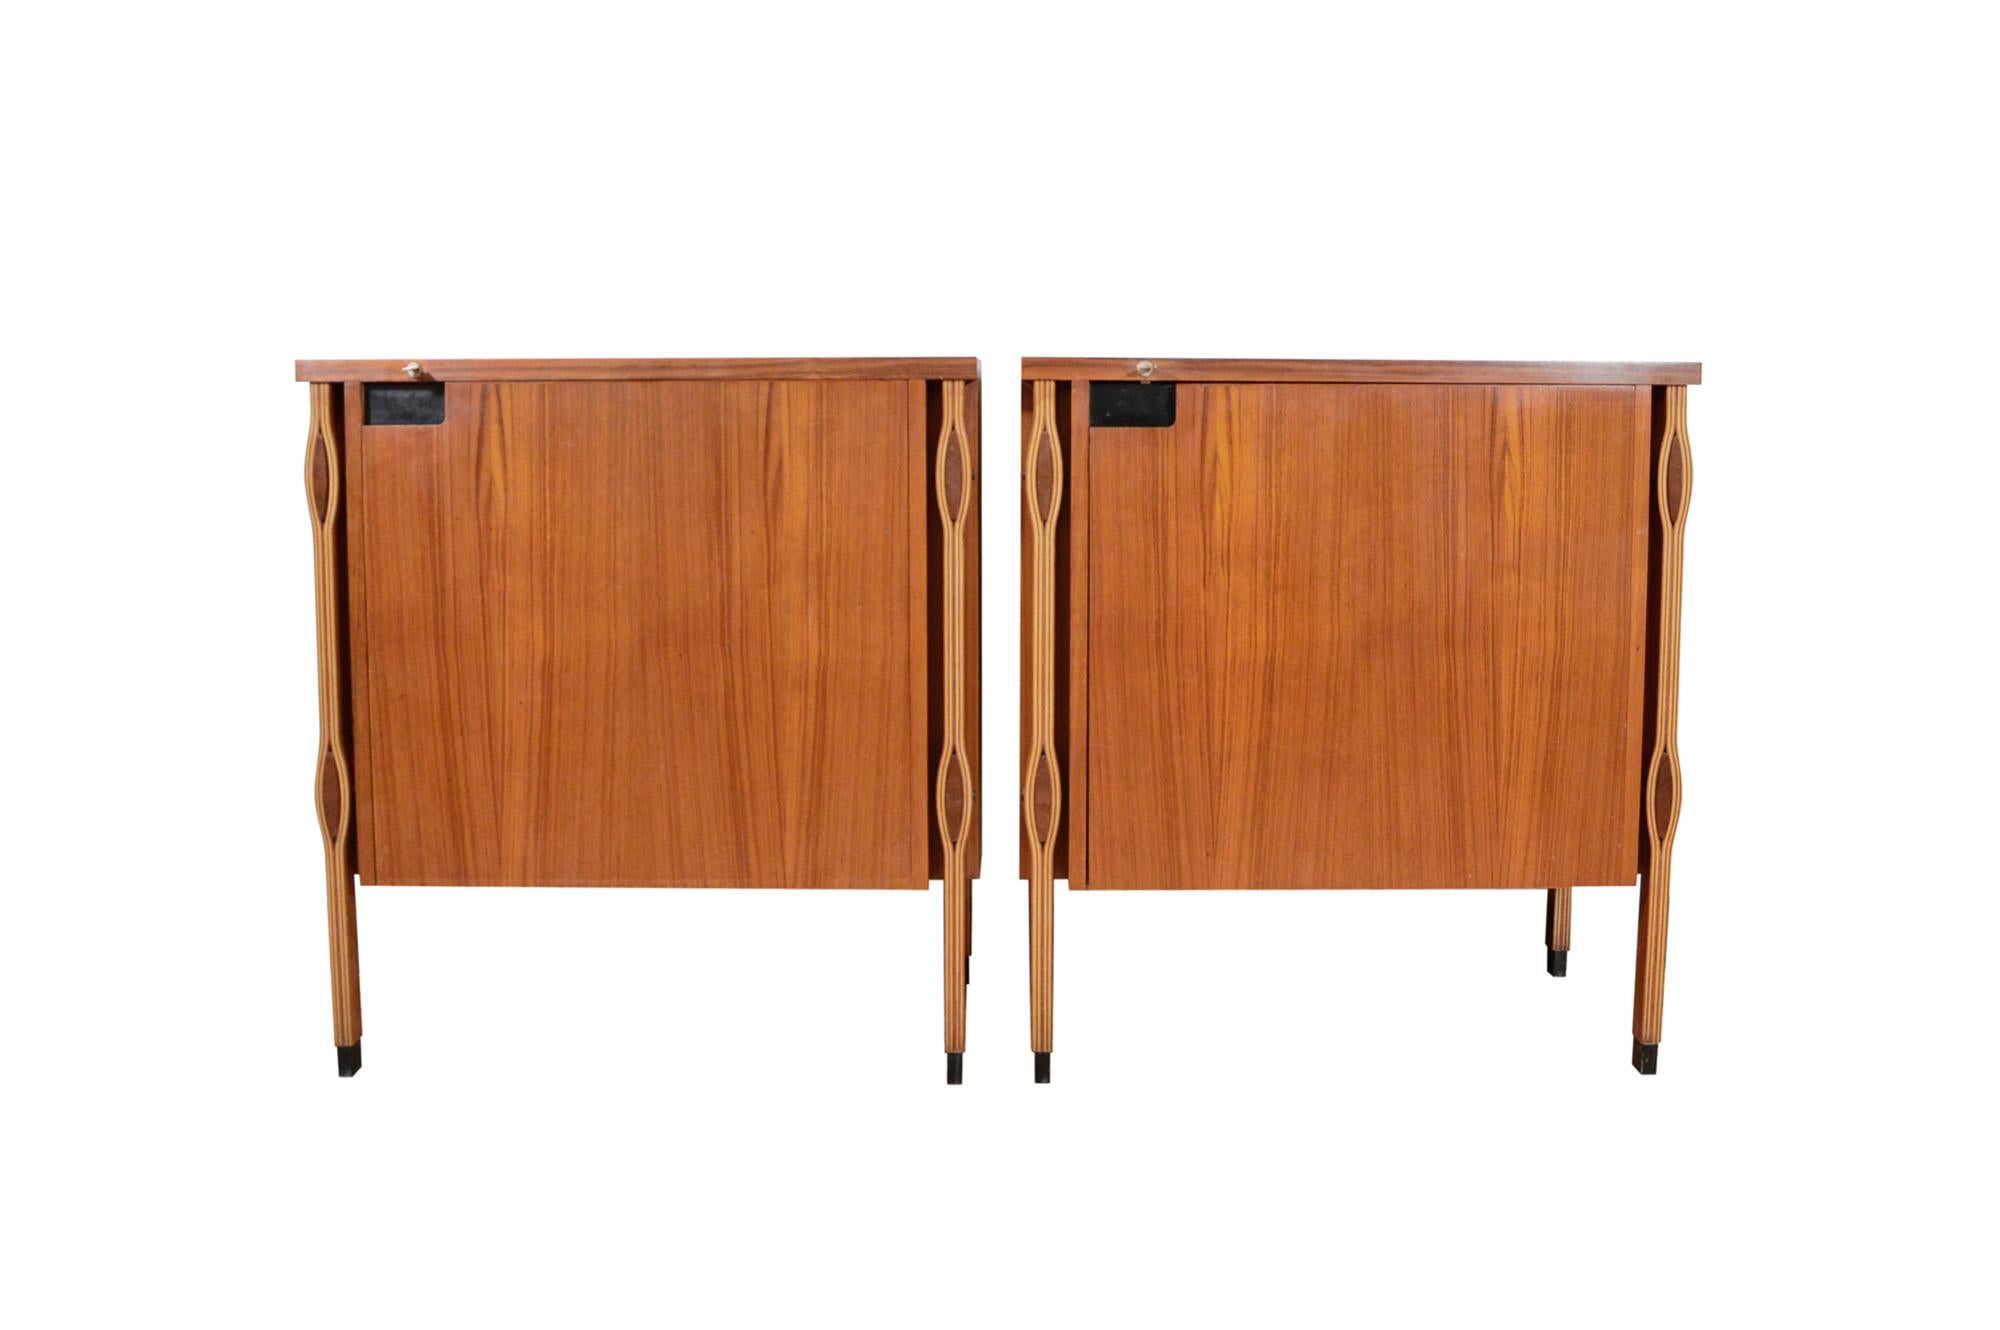 Pair of Taormina teak cabinets, designed by Ico and Luisa Parisi for MIM, Mobili Italiani Moderni, Rome, in 1958.
This series of furniture is characterized by the original construction, according to which the curved plywood legs wrap with a sinuous